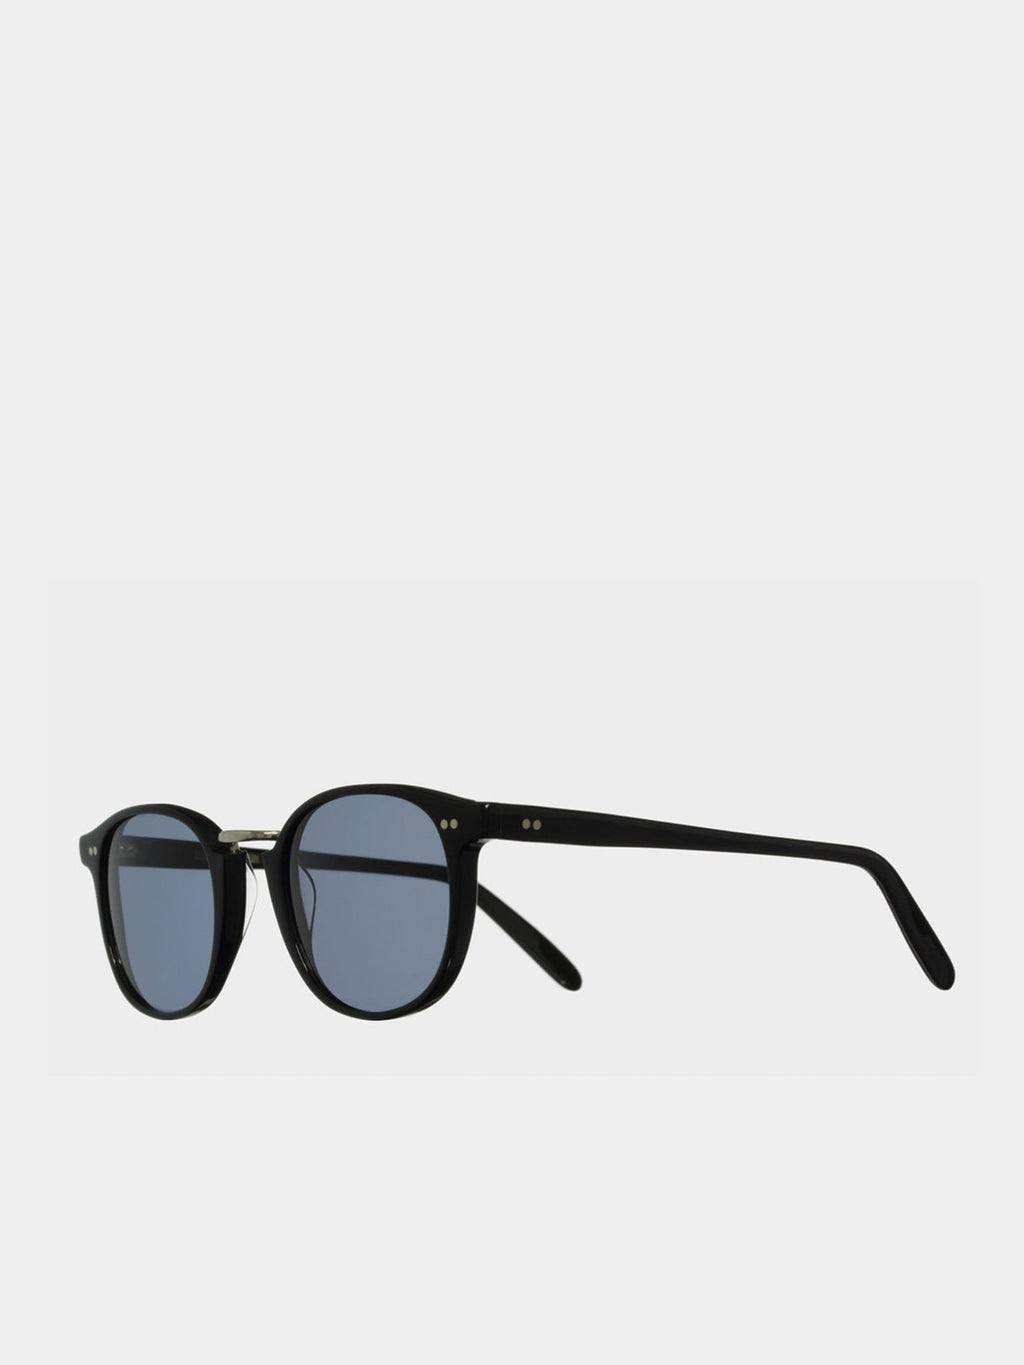 Cutler and Gross Round-Frame Acetate Sunglasses Black